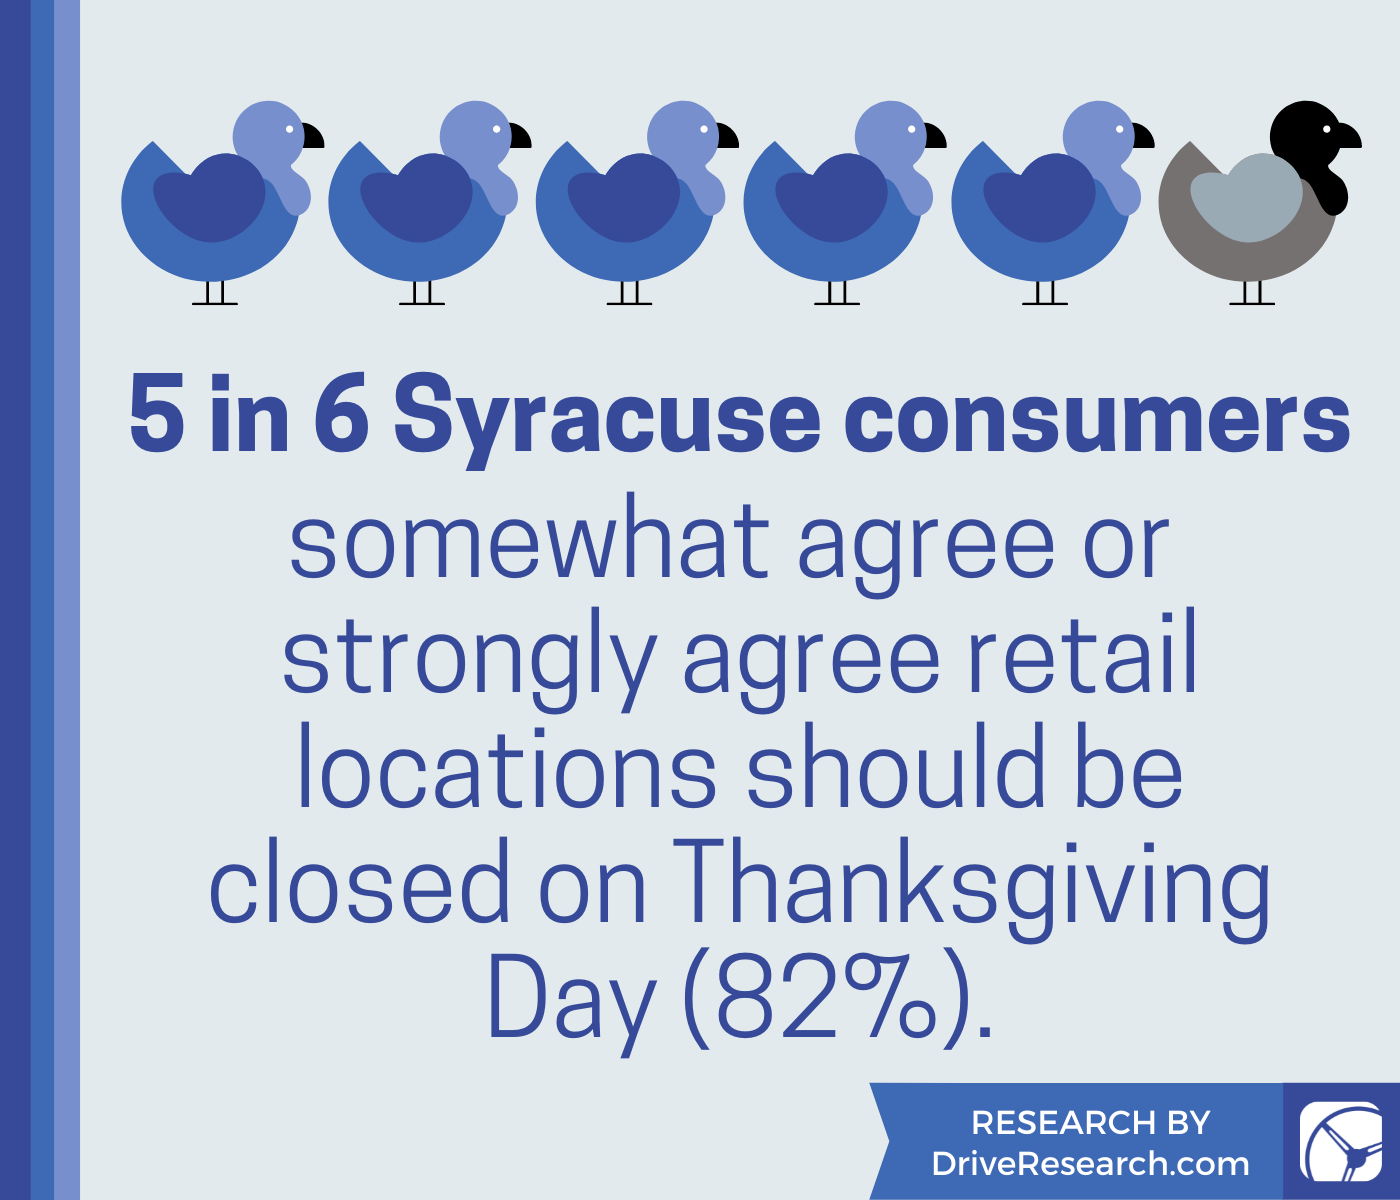 Chart 5 in 6 syracuse consumers somewhat agree or  strongly agree retail locations should be closed on Thanksgiving Day (82%)